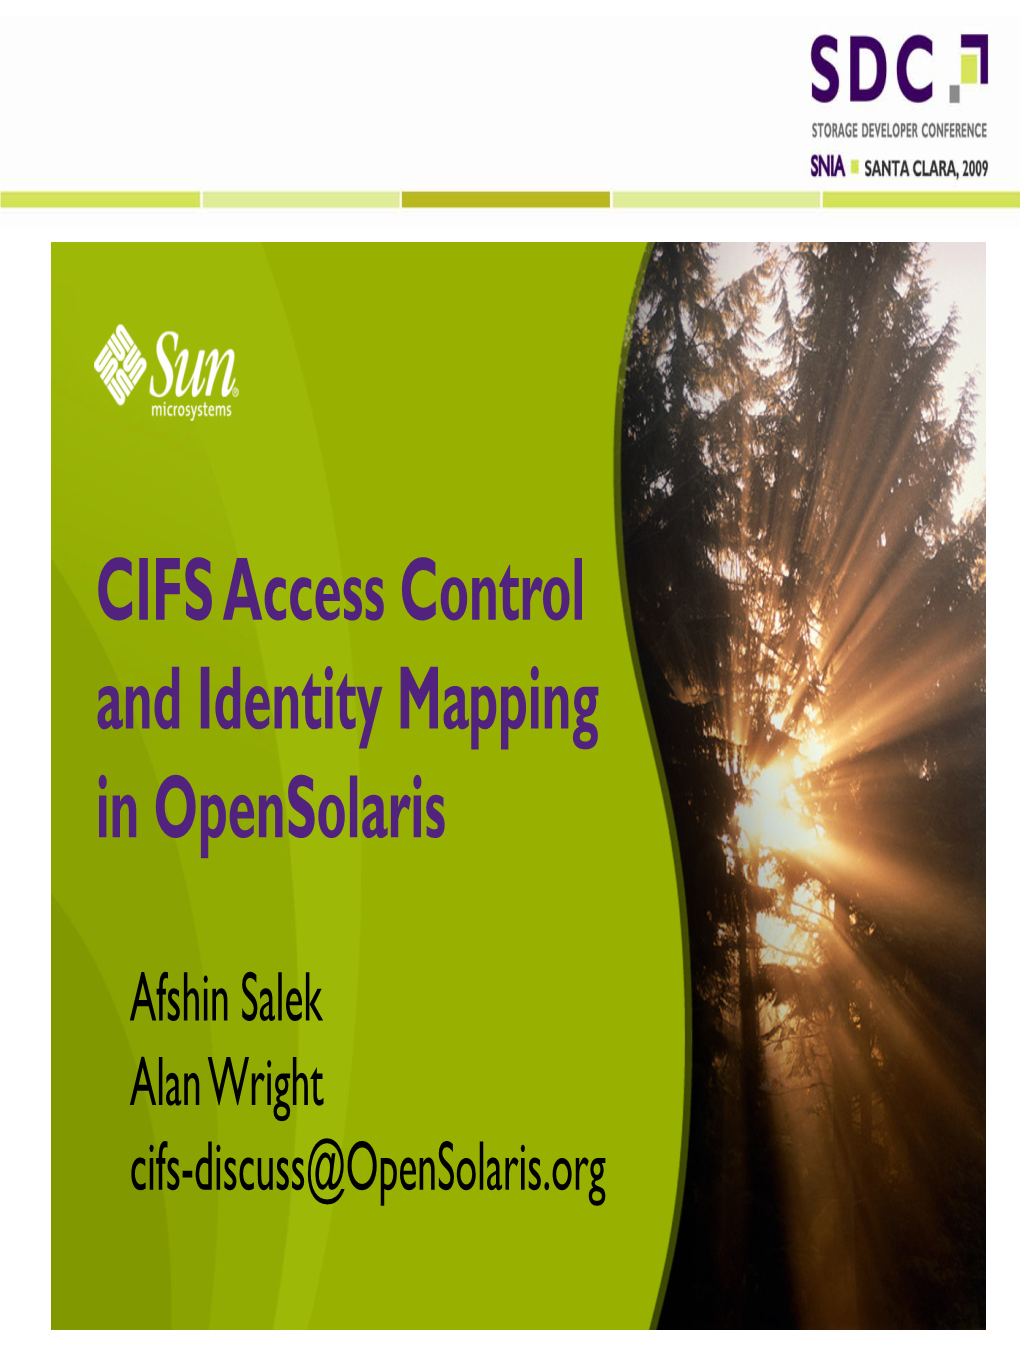 CIFS Access Control and Identity Mapping in Opensolaris